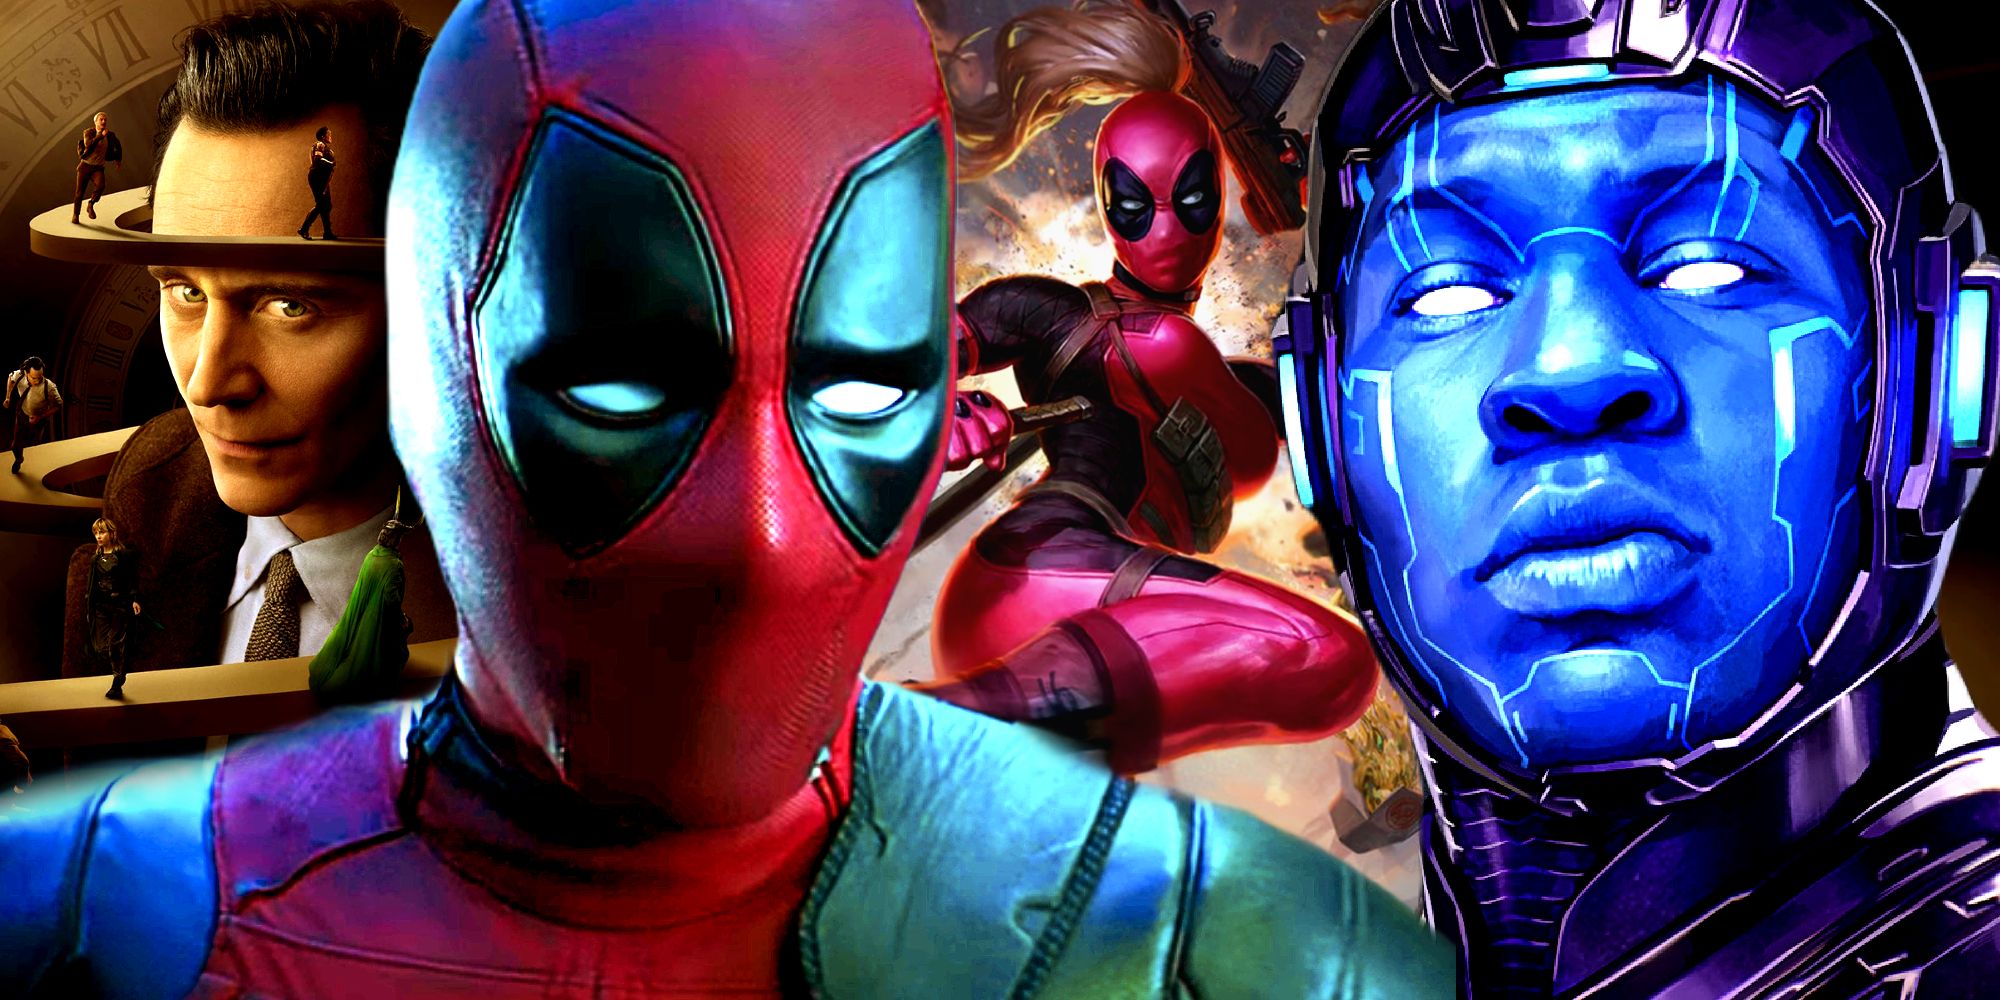 Deadpool Reacts to Kang the Conqueror with Loki and Lady Deadpool in the Background